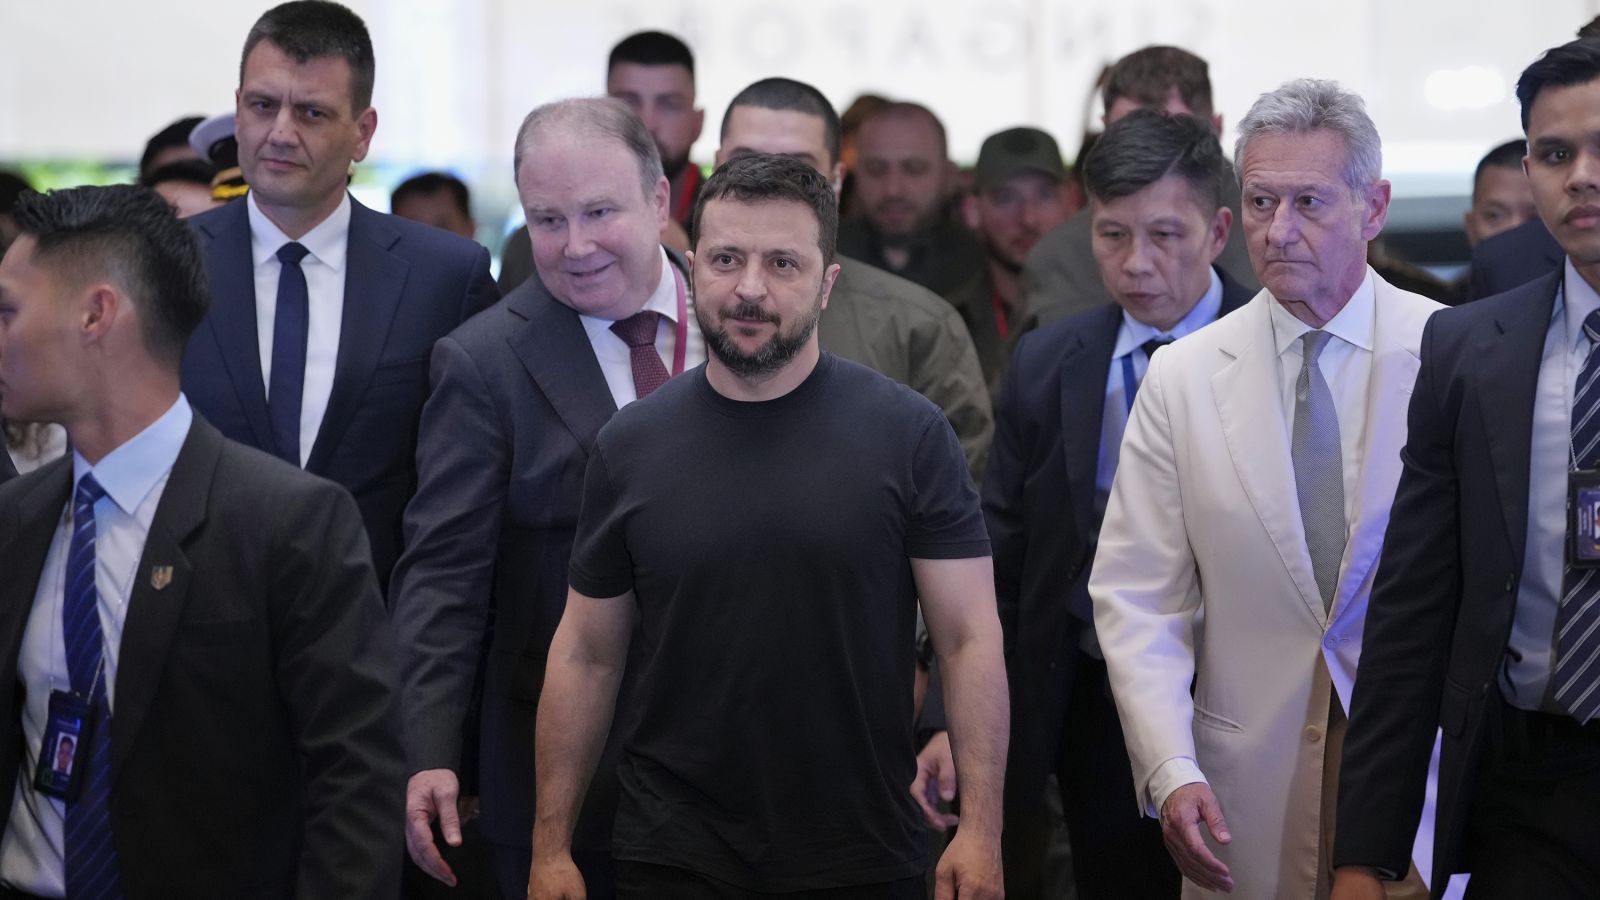 Zelensky makes surprise appearance at Asia-Pacific defense ministers summit in Singapore